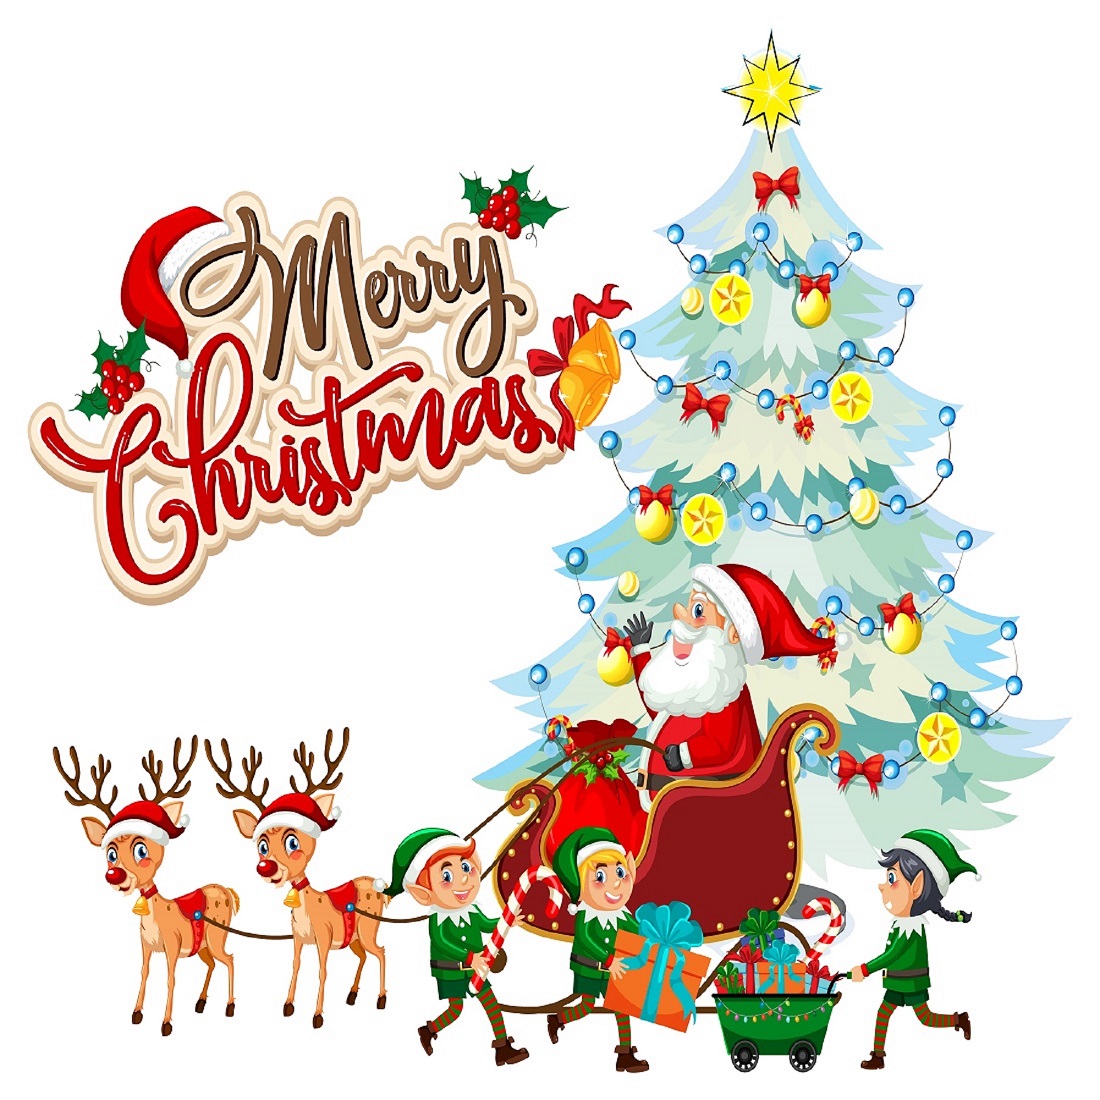 merry christmas text with cartoon character 965